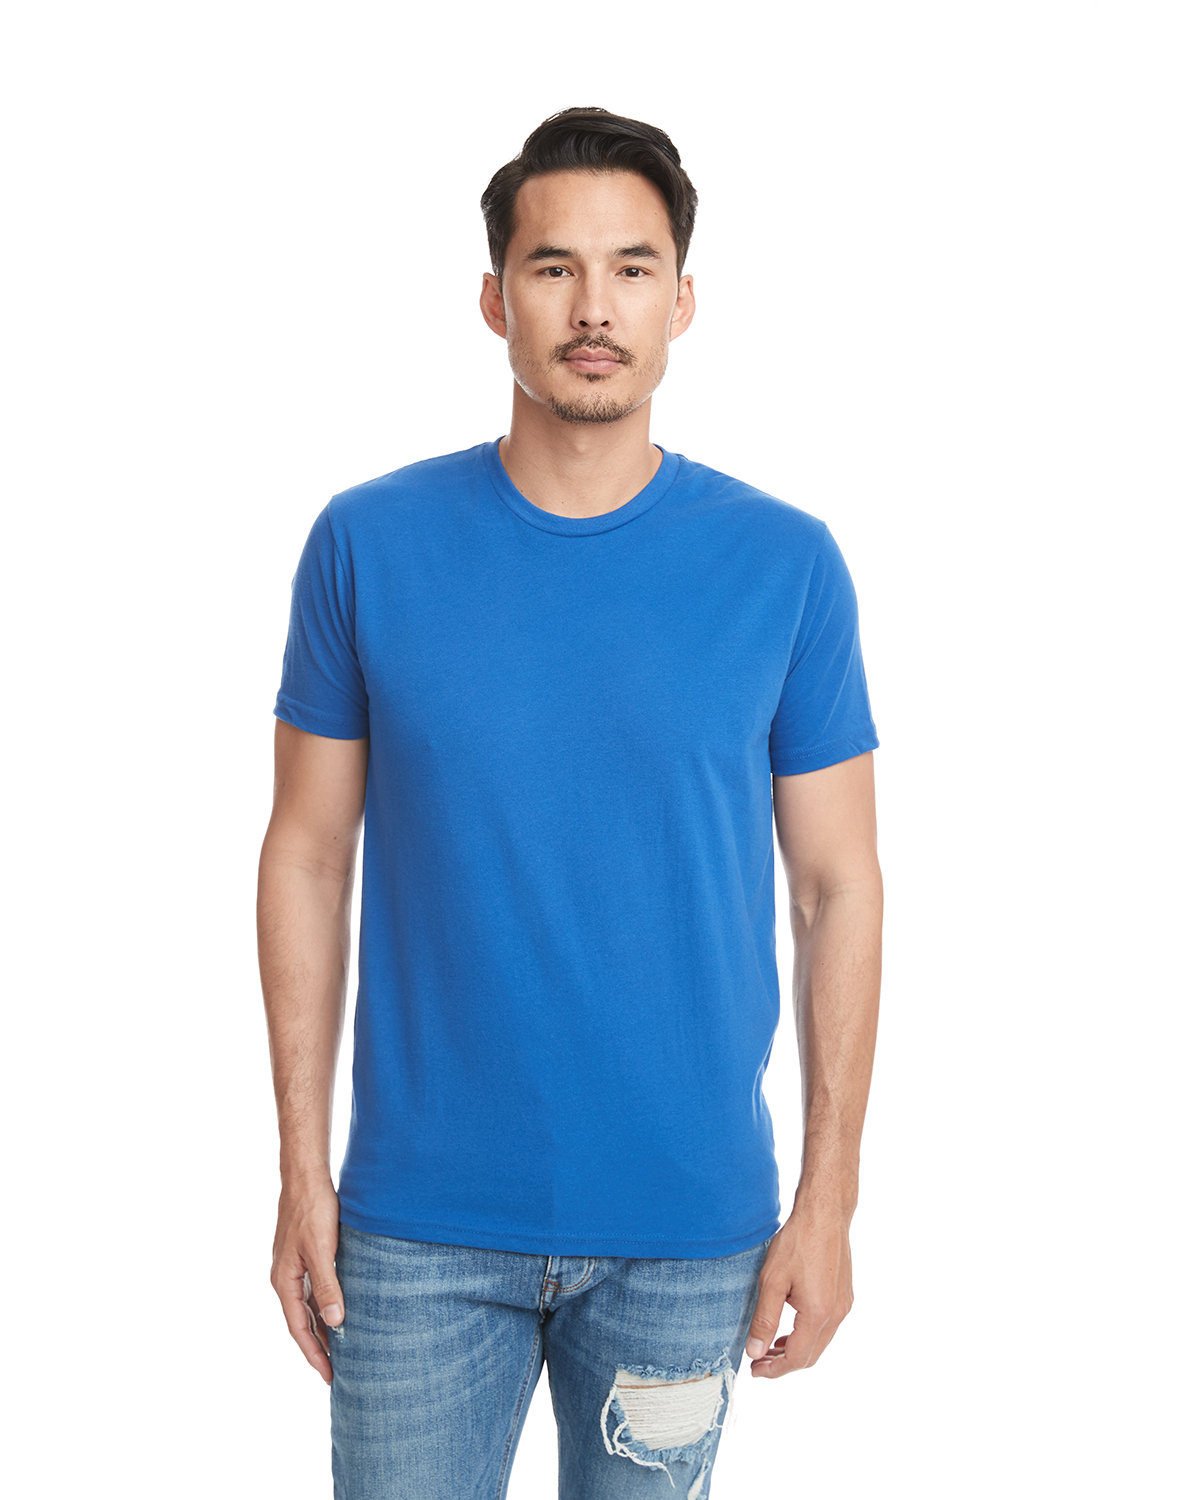 Next Level Apparel Unisex CVC Sueded Tee, Product